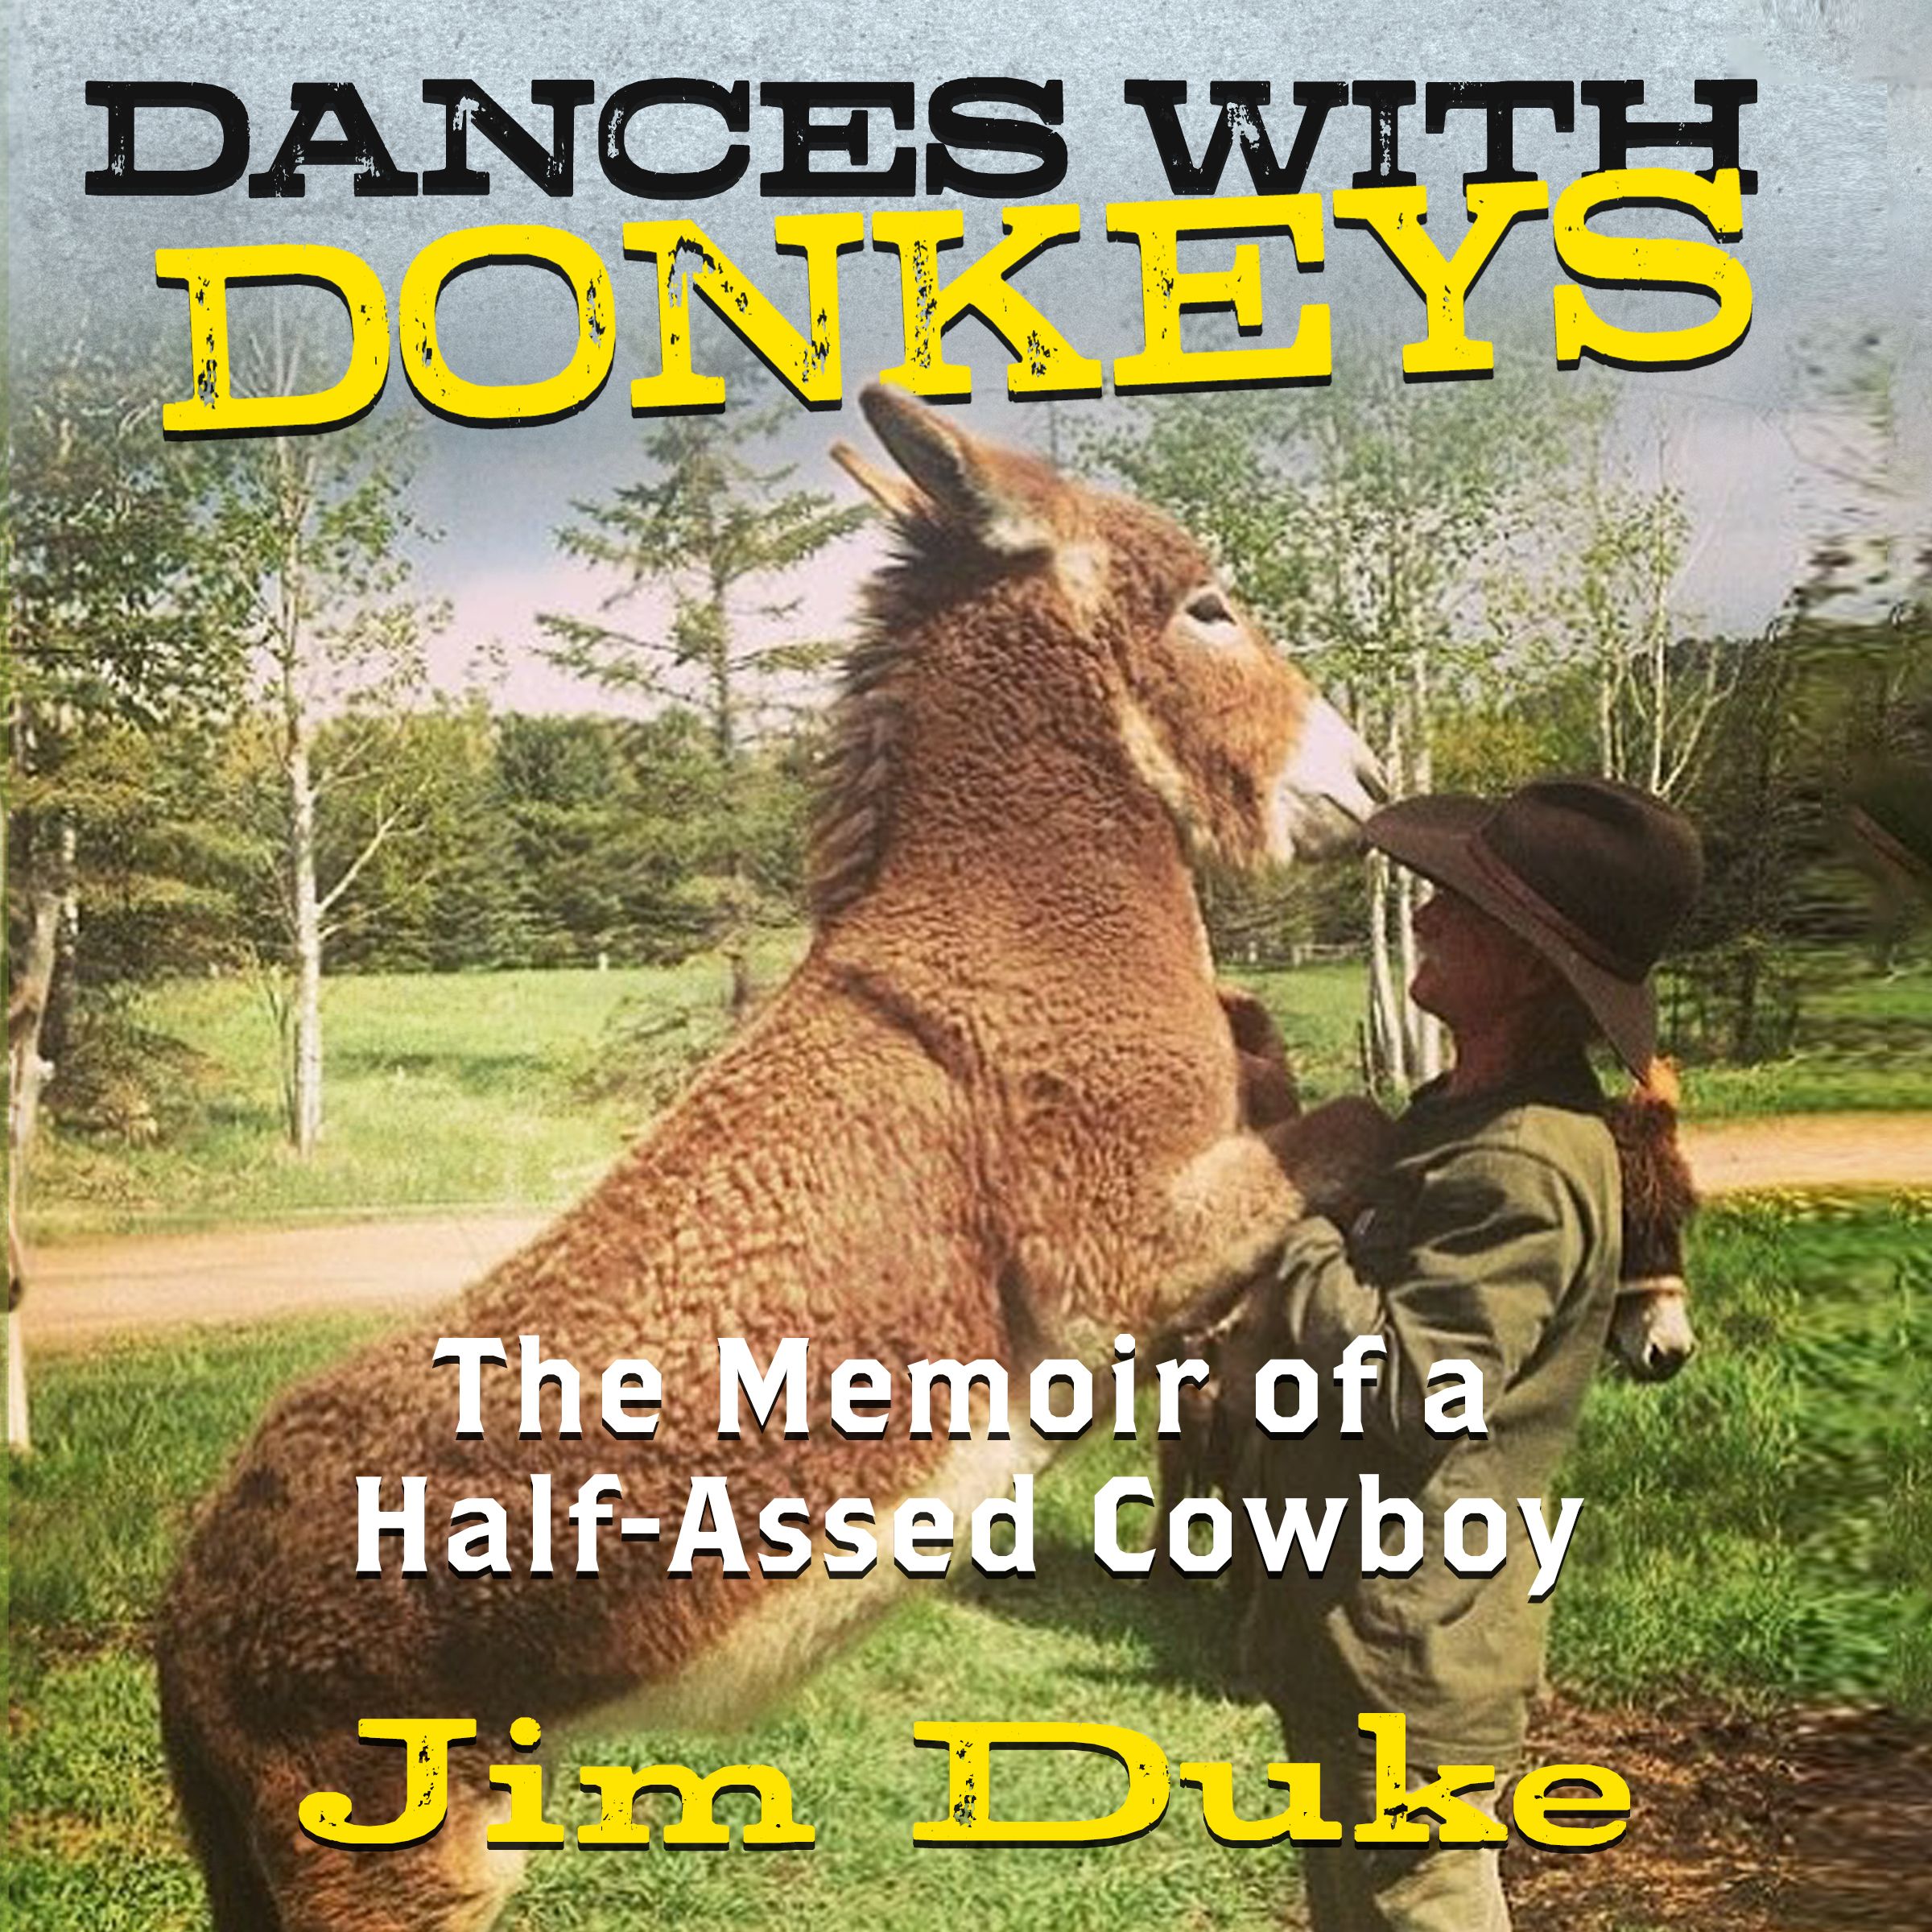 'Dances with Donkeys' book cover